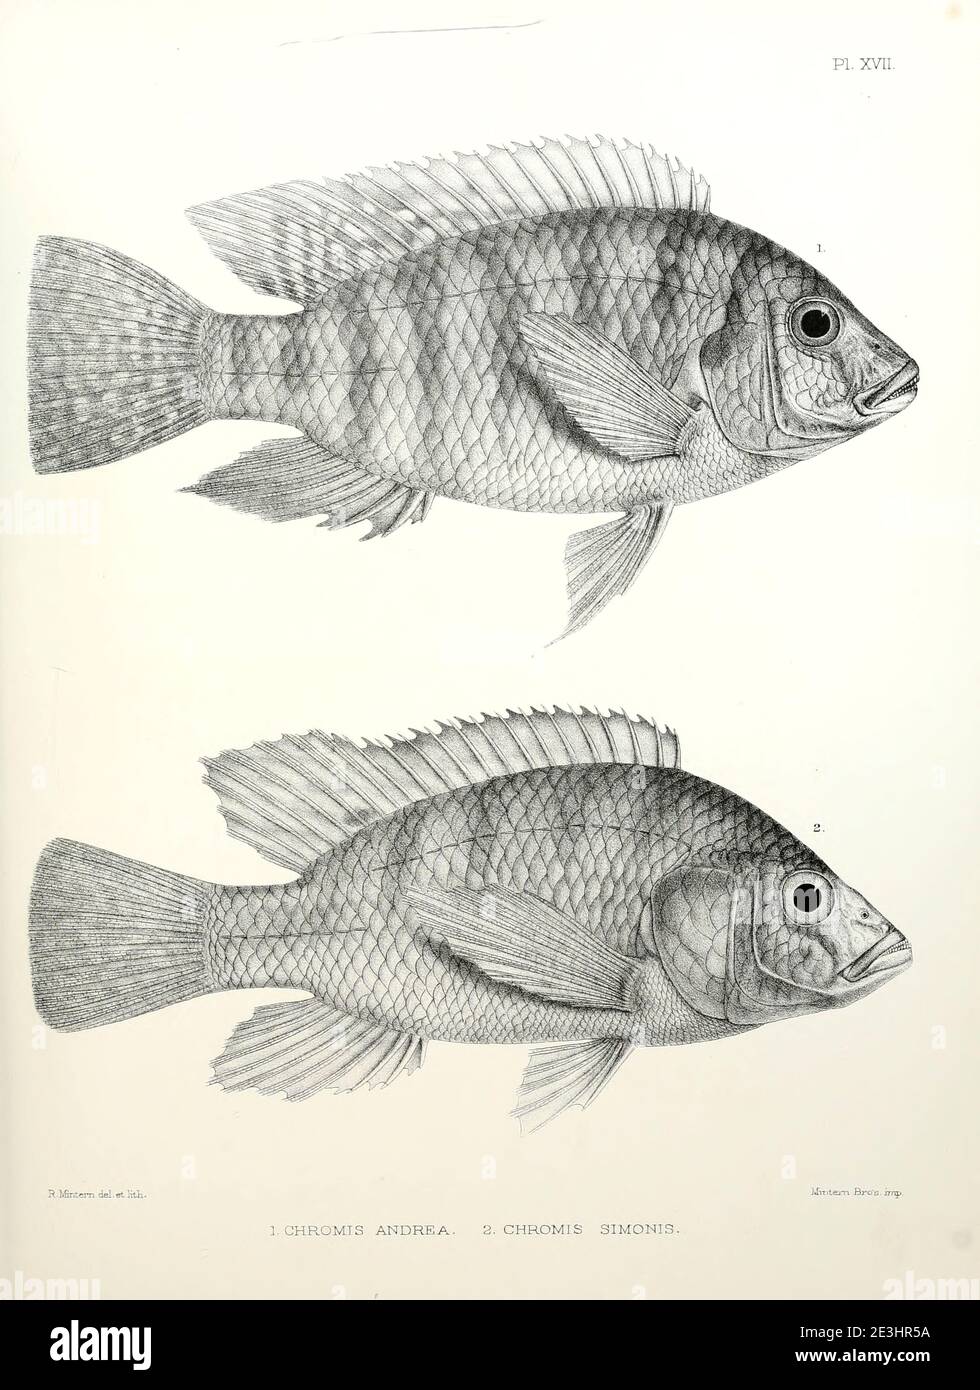 Chromis fish [Here as Chromis andrew and Chromis simonis] From the survey of western Palestine. The fauna and flora of Palestine by Tristram, H. B. (Henry Baker), 1822-1906 Published by The Committee of the Palestine Exploration Fund, London, 1884 Stock Photo